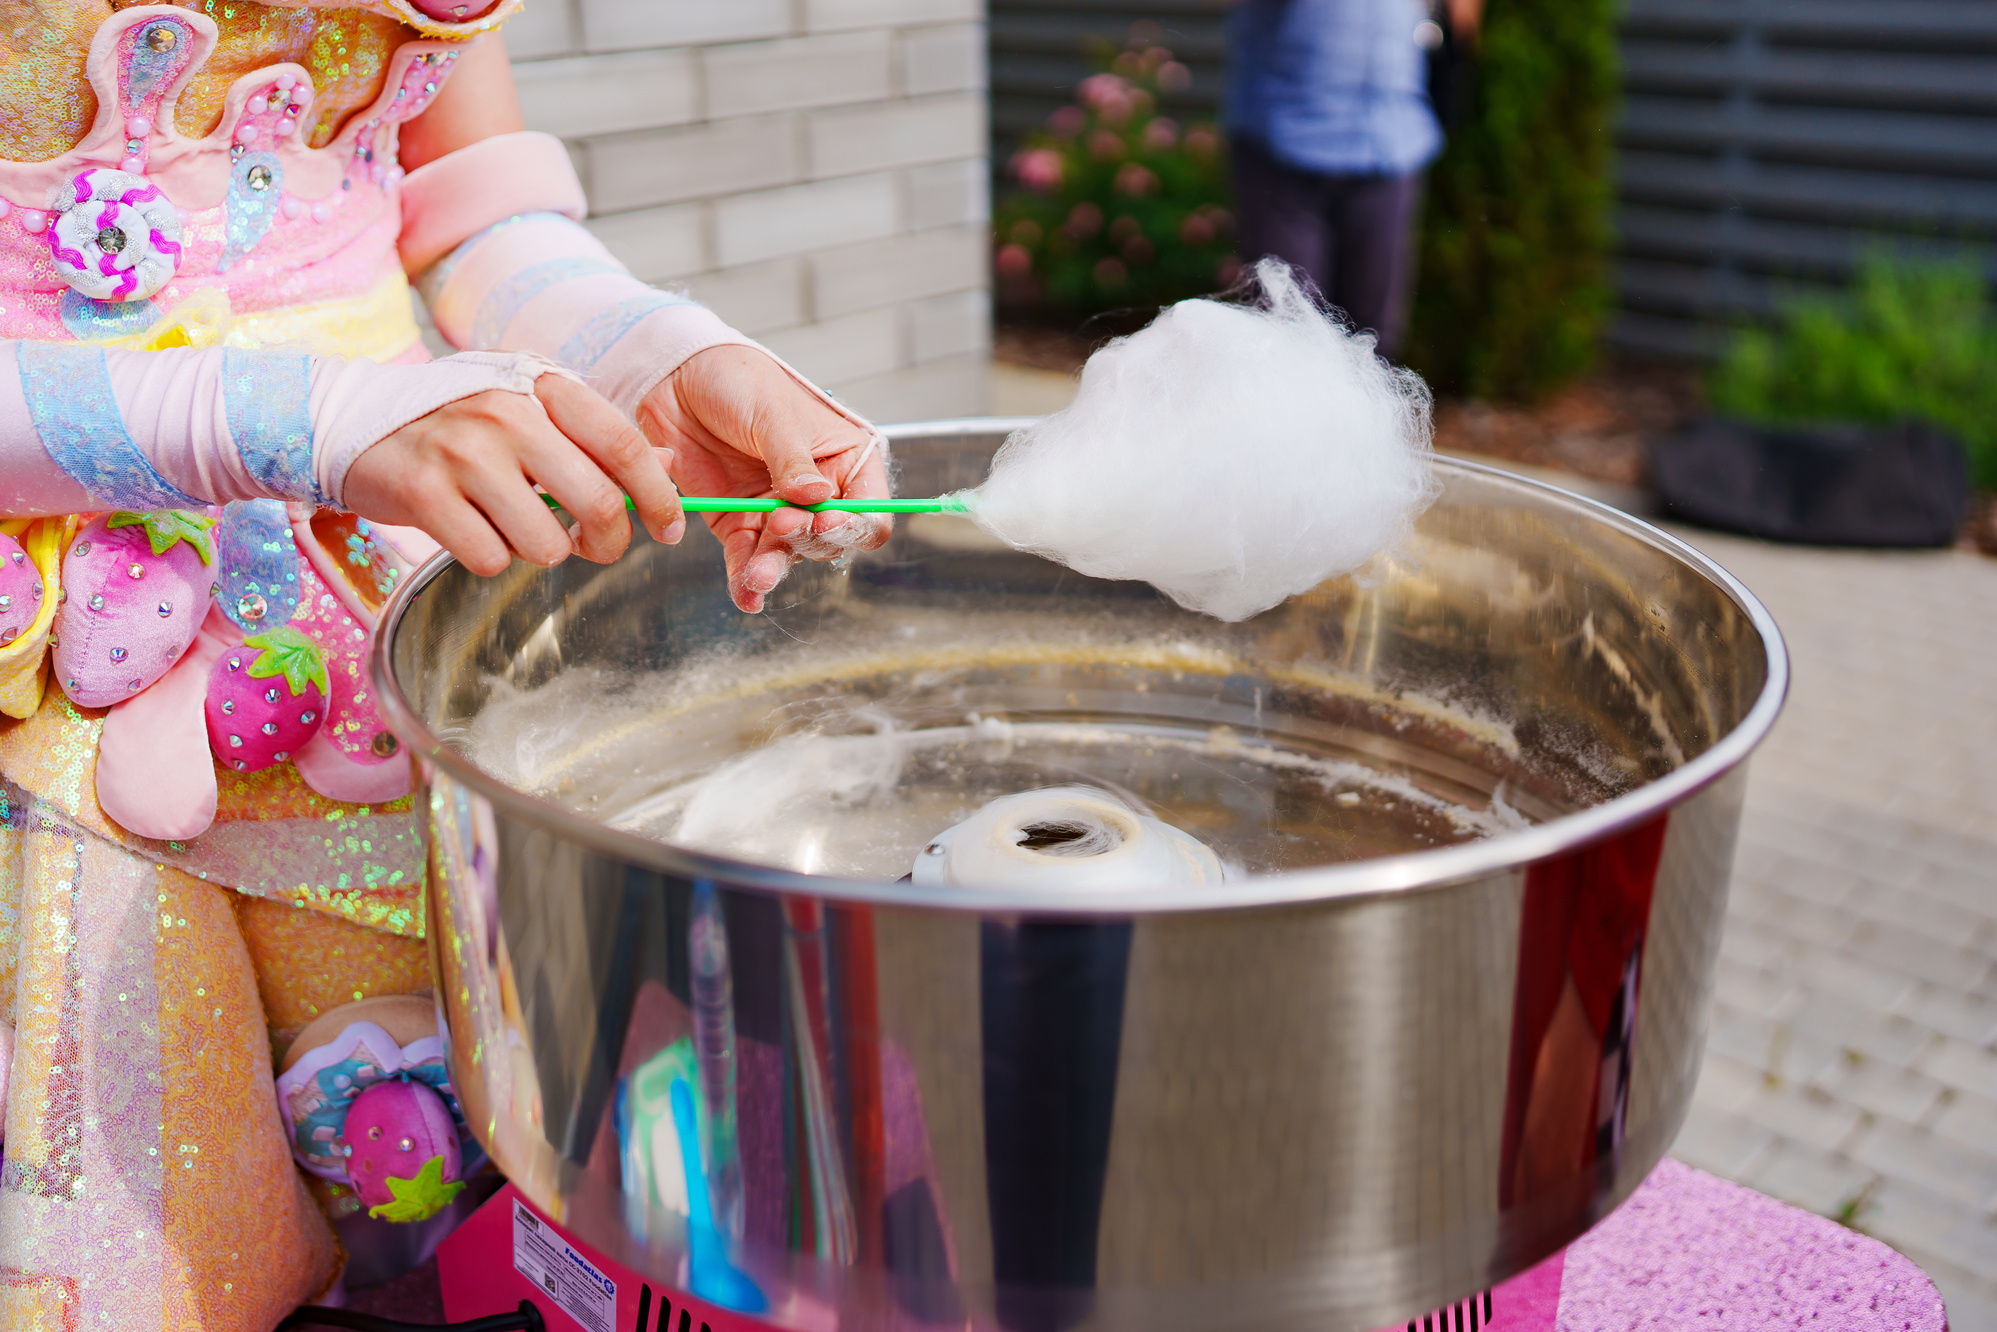 At the festival, a person deftly creates cotton candy. cotton candy machine